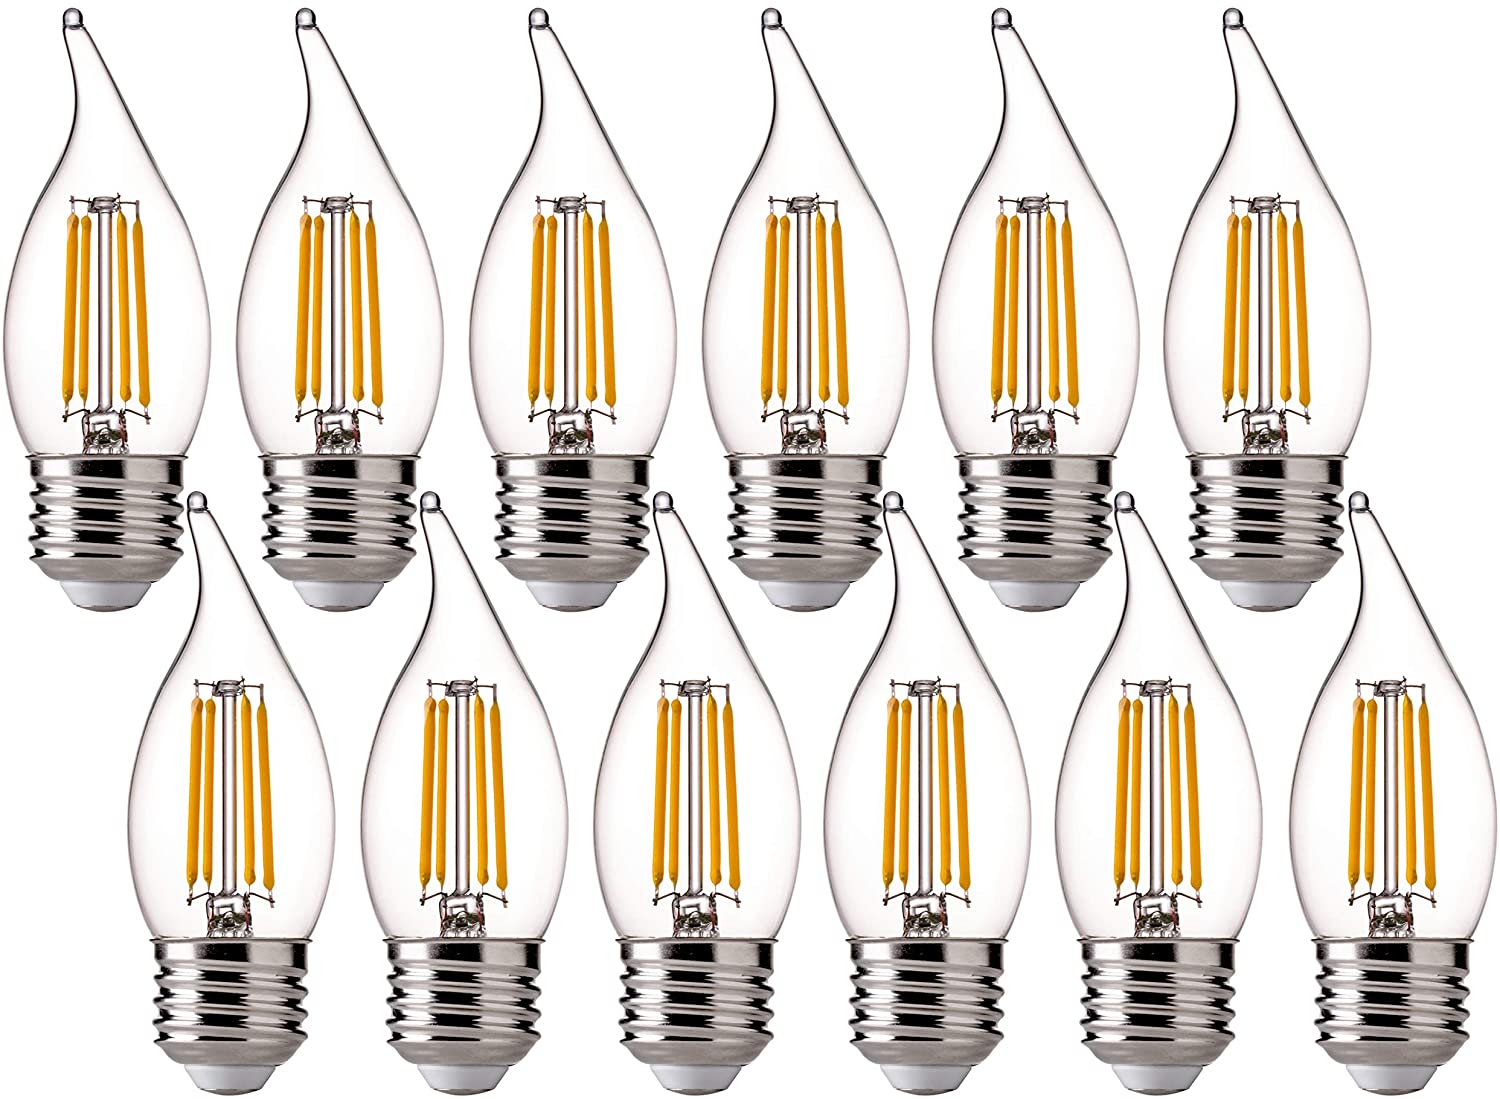 E26 LED Filament Candelabra Bulb 60W Equivalent Dimmable 2700K Warm White 12Pack 